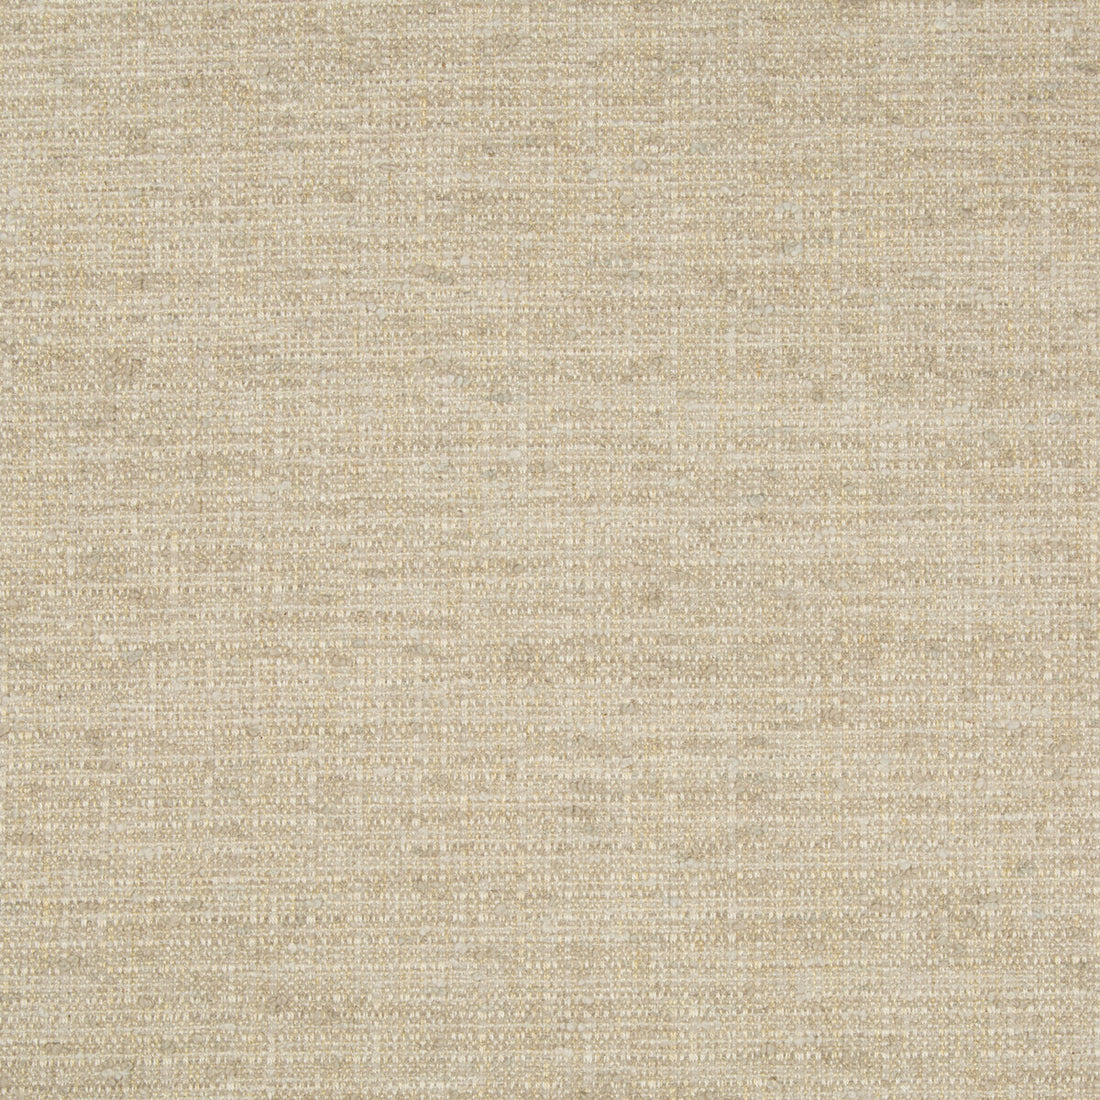 Ynez fabric in mist color - pattern 34800.1611.0 - by Kravet Couture in the Barbara Barry Panorama collection